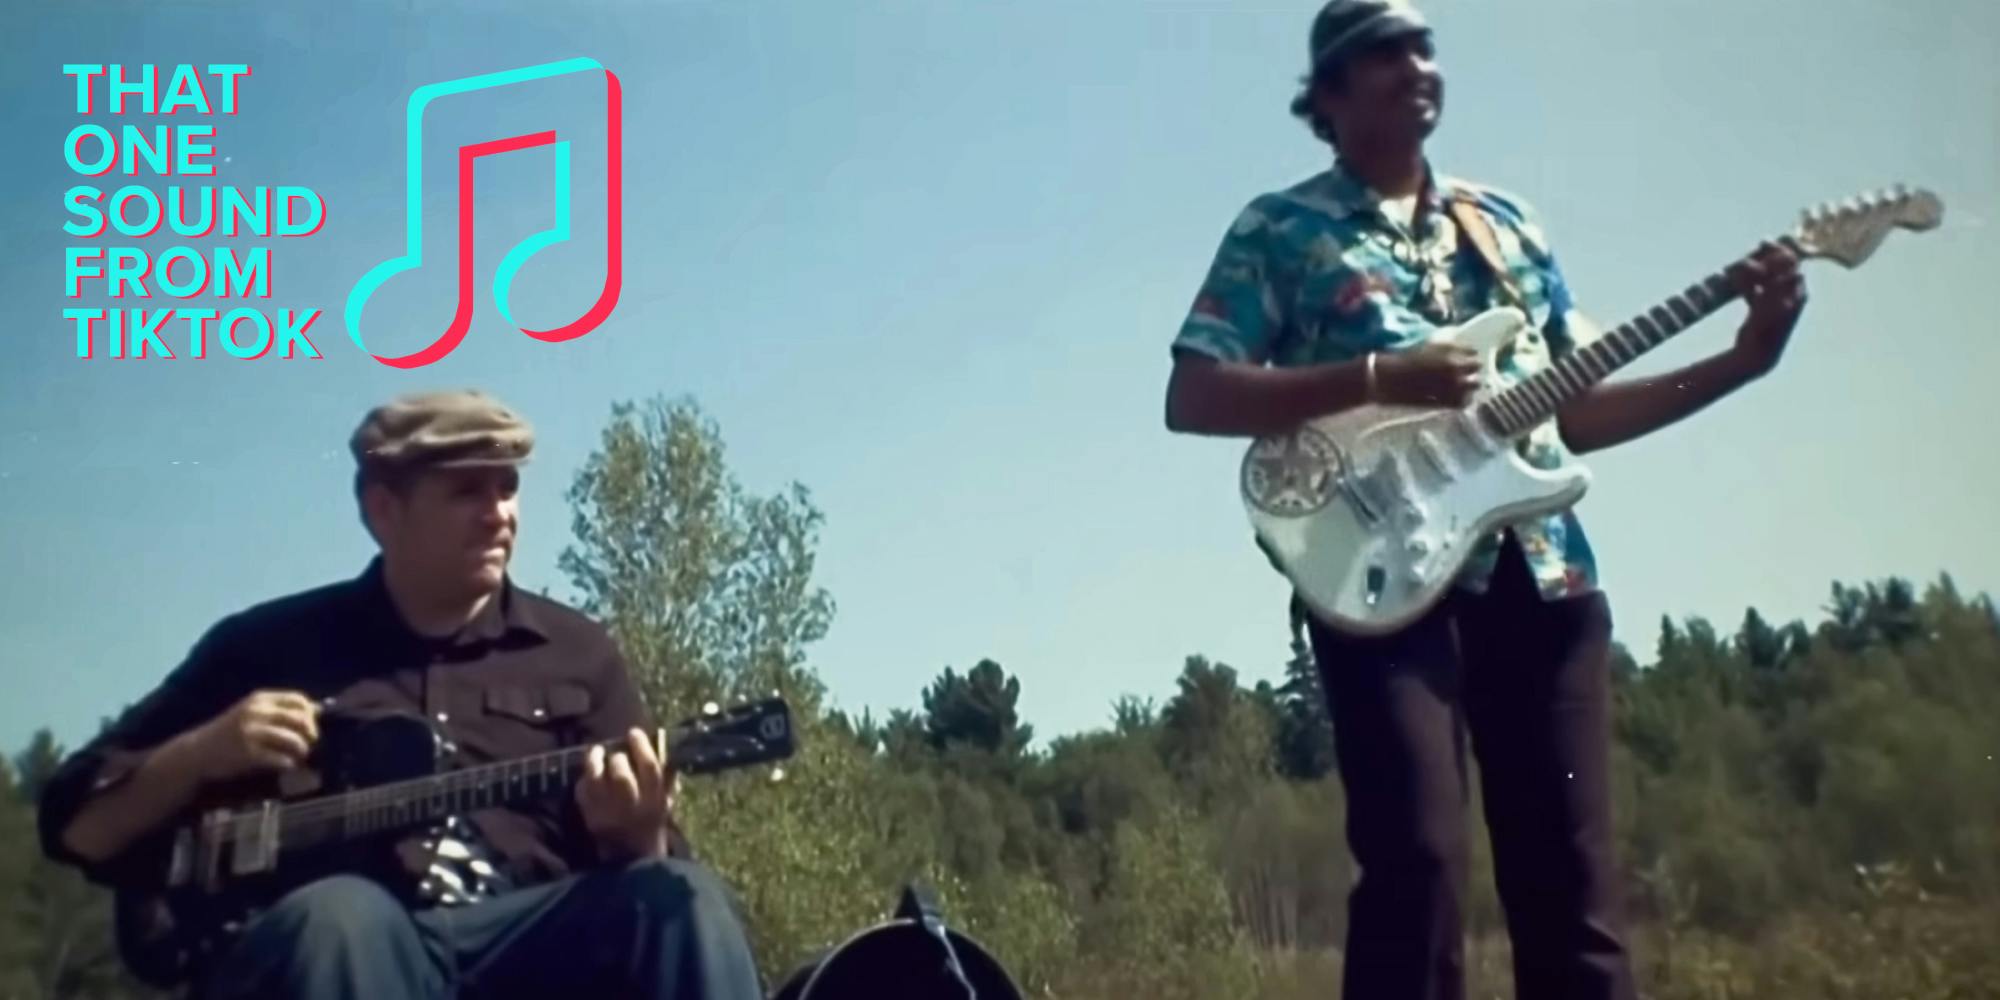 King Khan & BBQ Show music video for Love You So with "That One Sound" logo top left